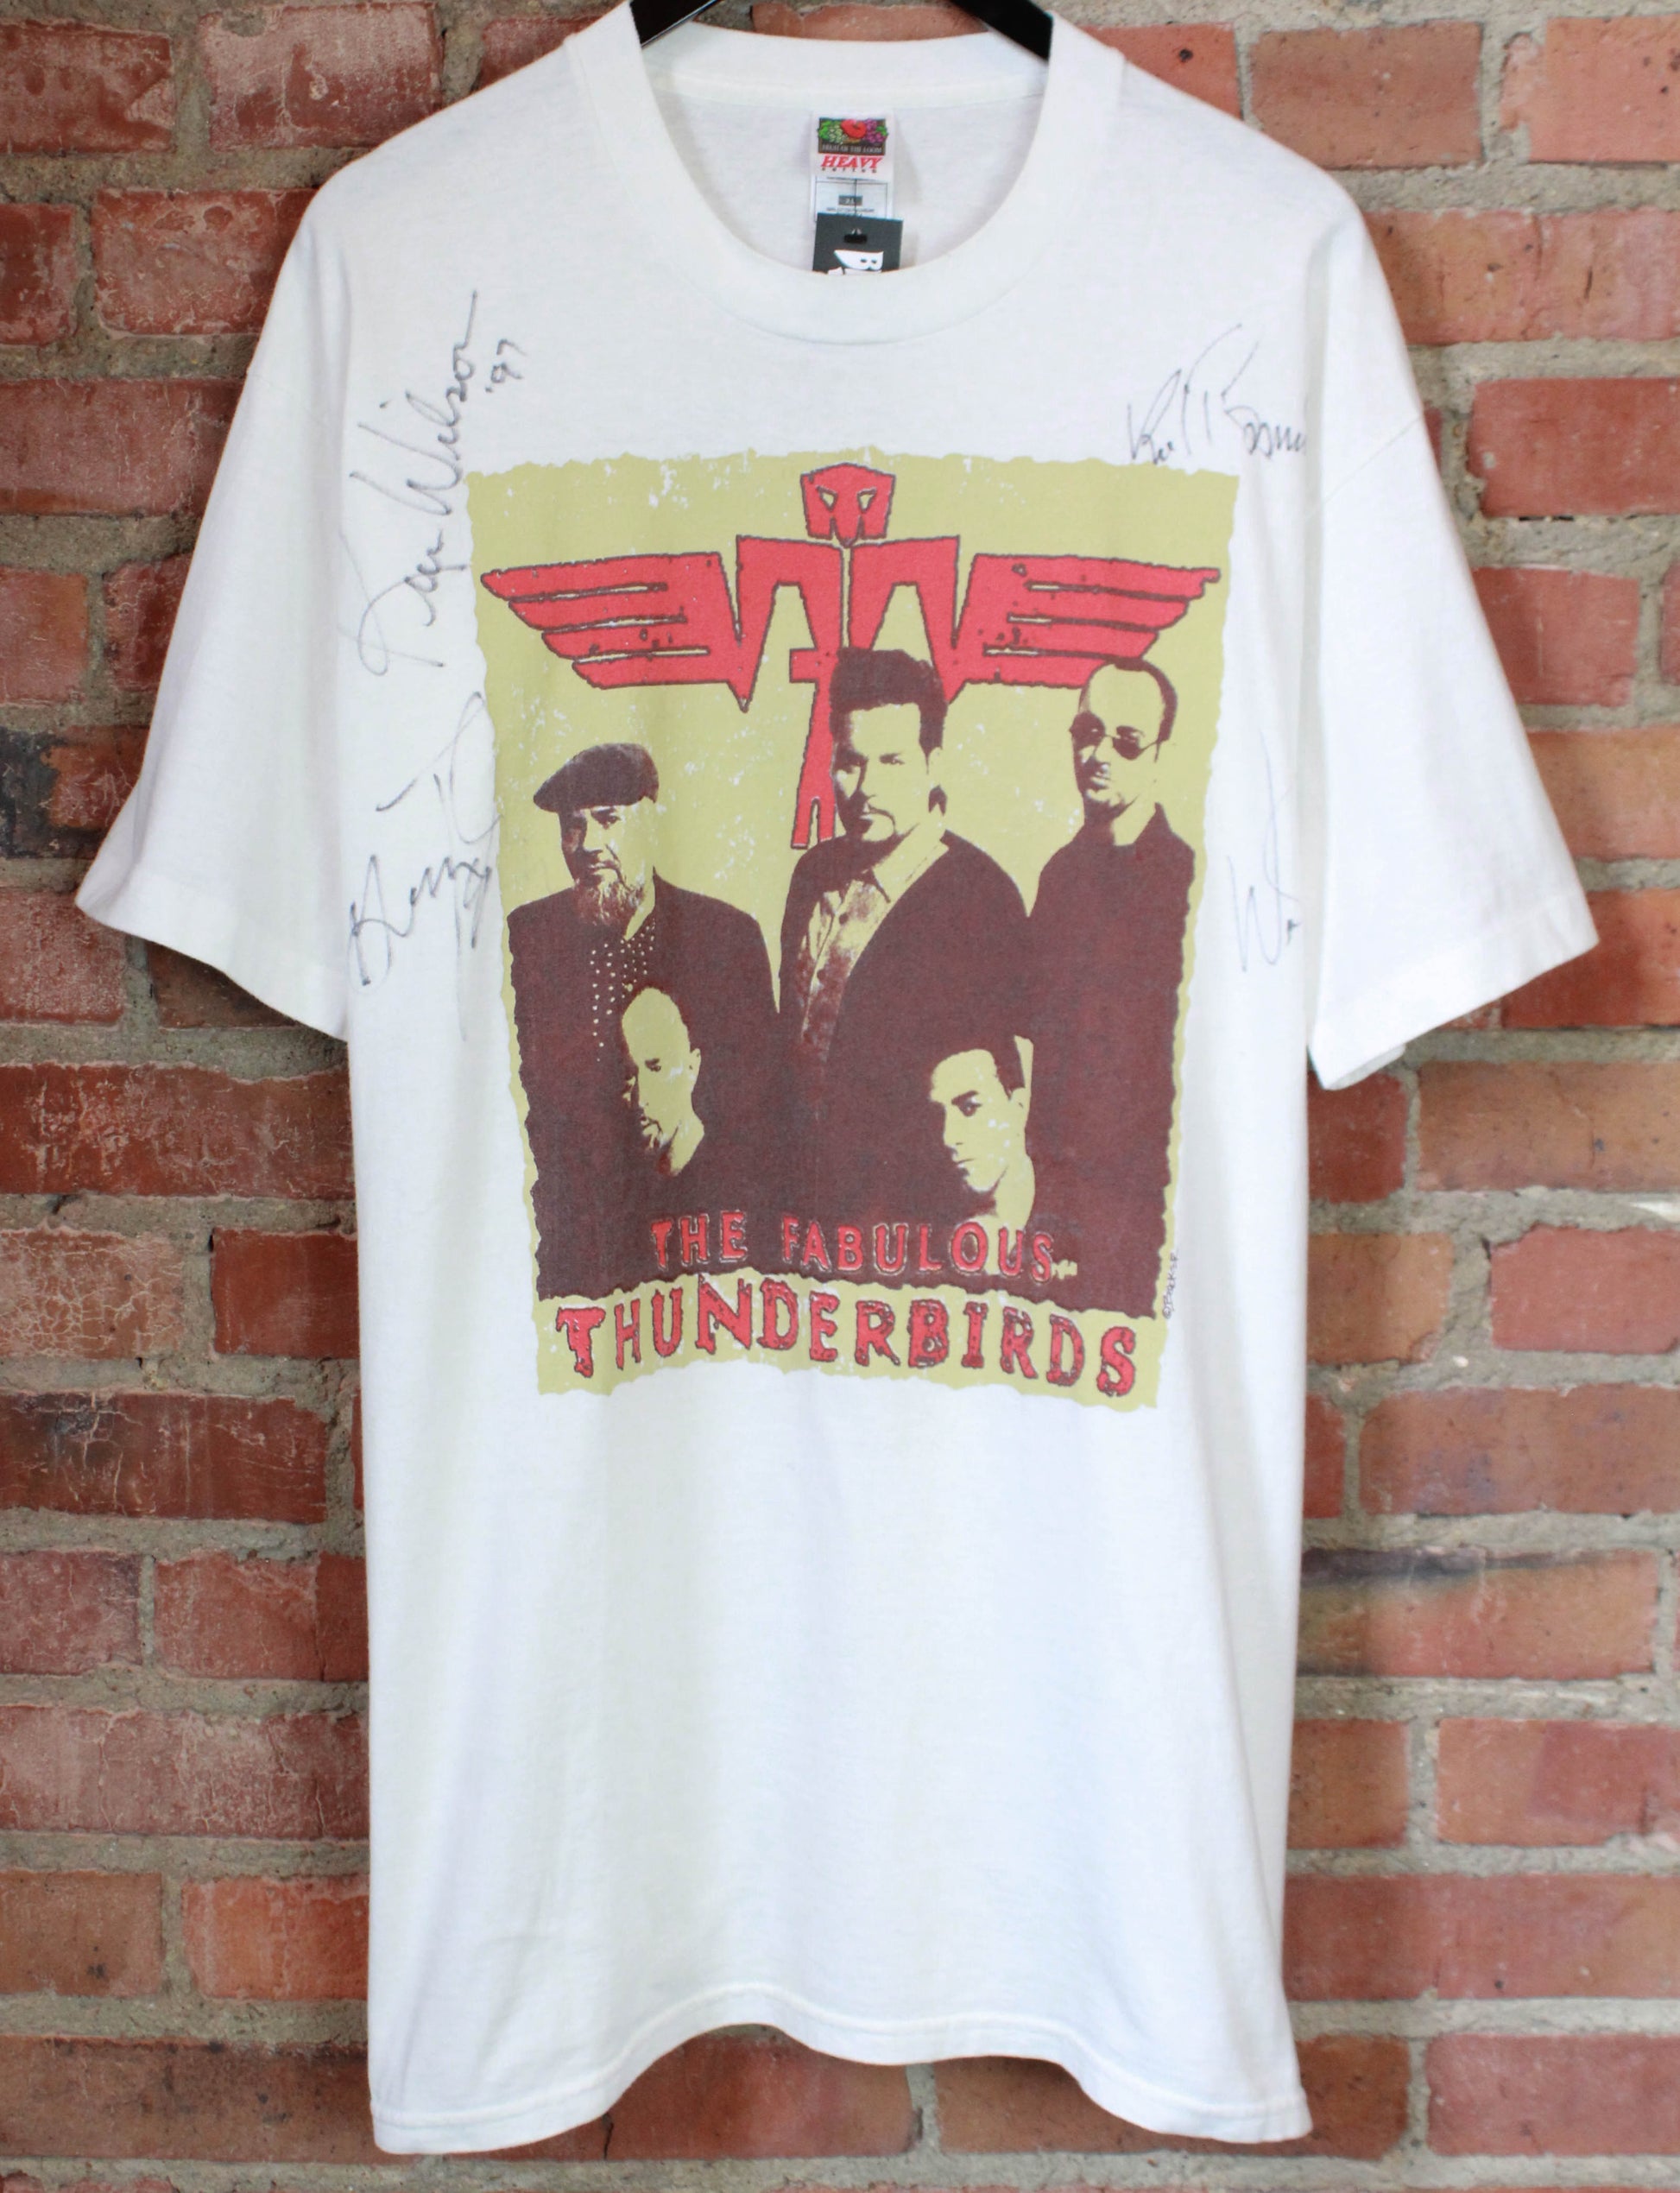 Vintage The Fabulous Thunderbirds Concert T Shirt 1996 The Roll Of The Dice Tour Signed Unisex XL